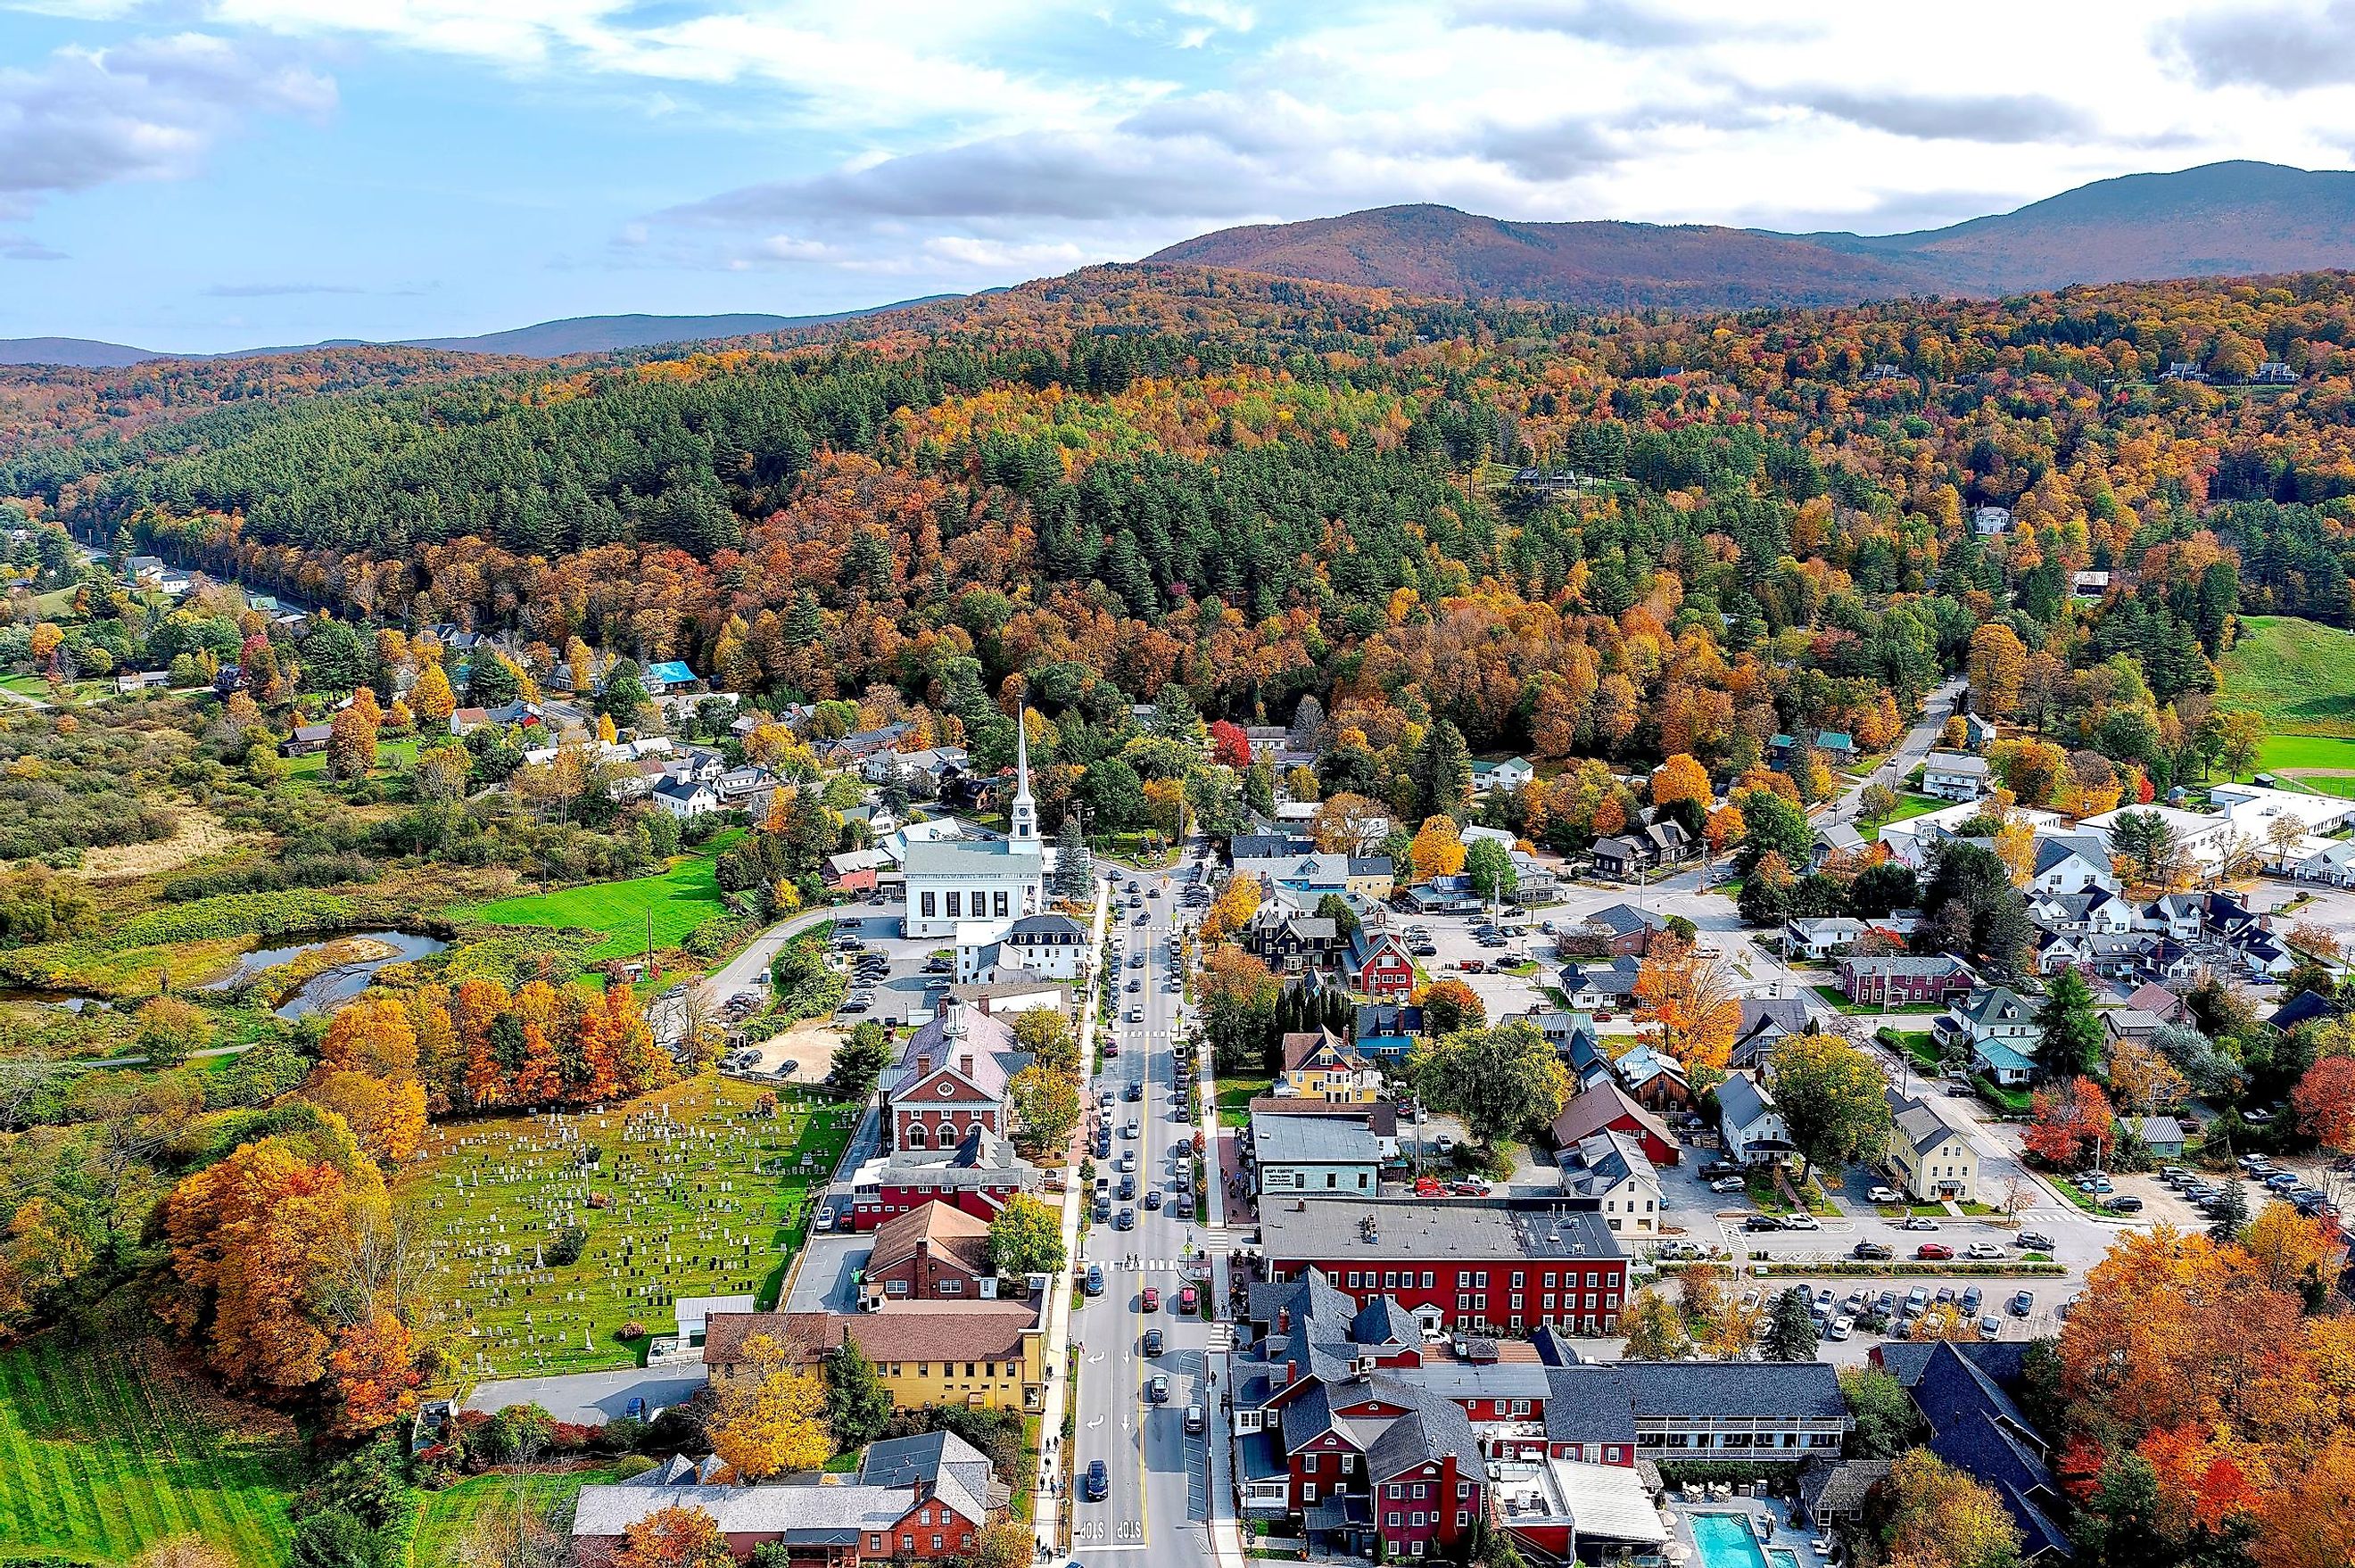 Aerial view of Stowe, Vermont.